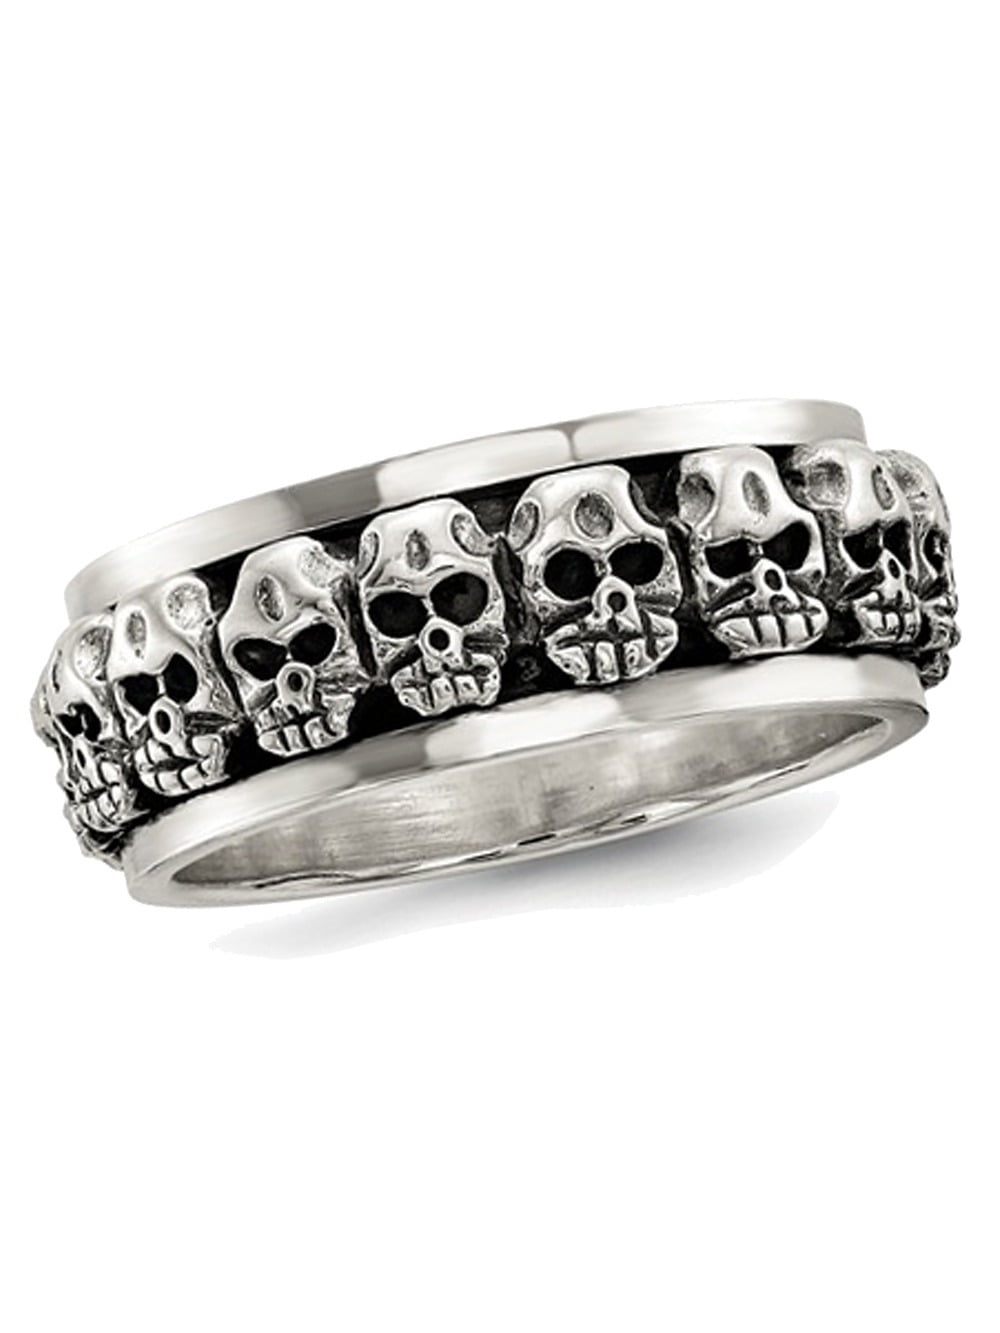 Gem And Harmony - Mens Antiqued Polished Skull Ring in Sterling Silver ...